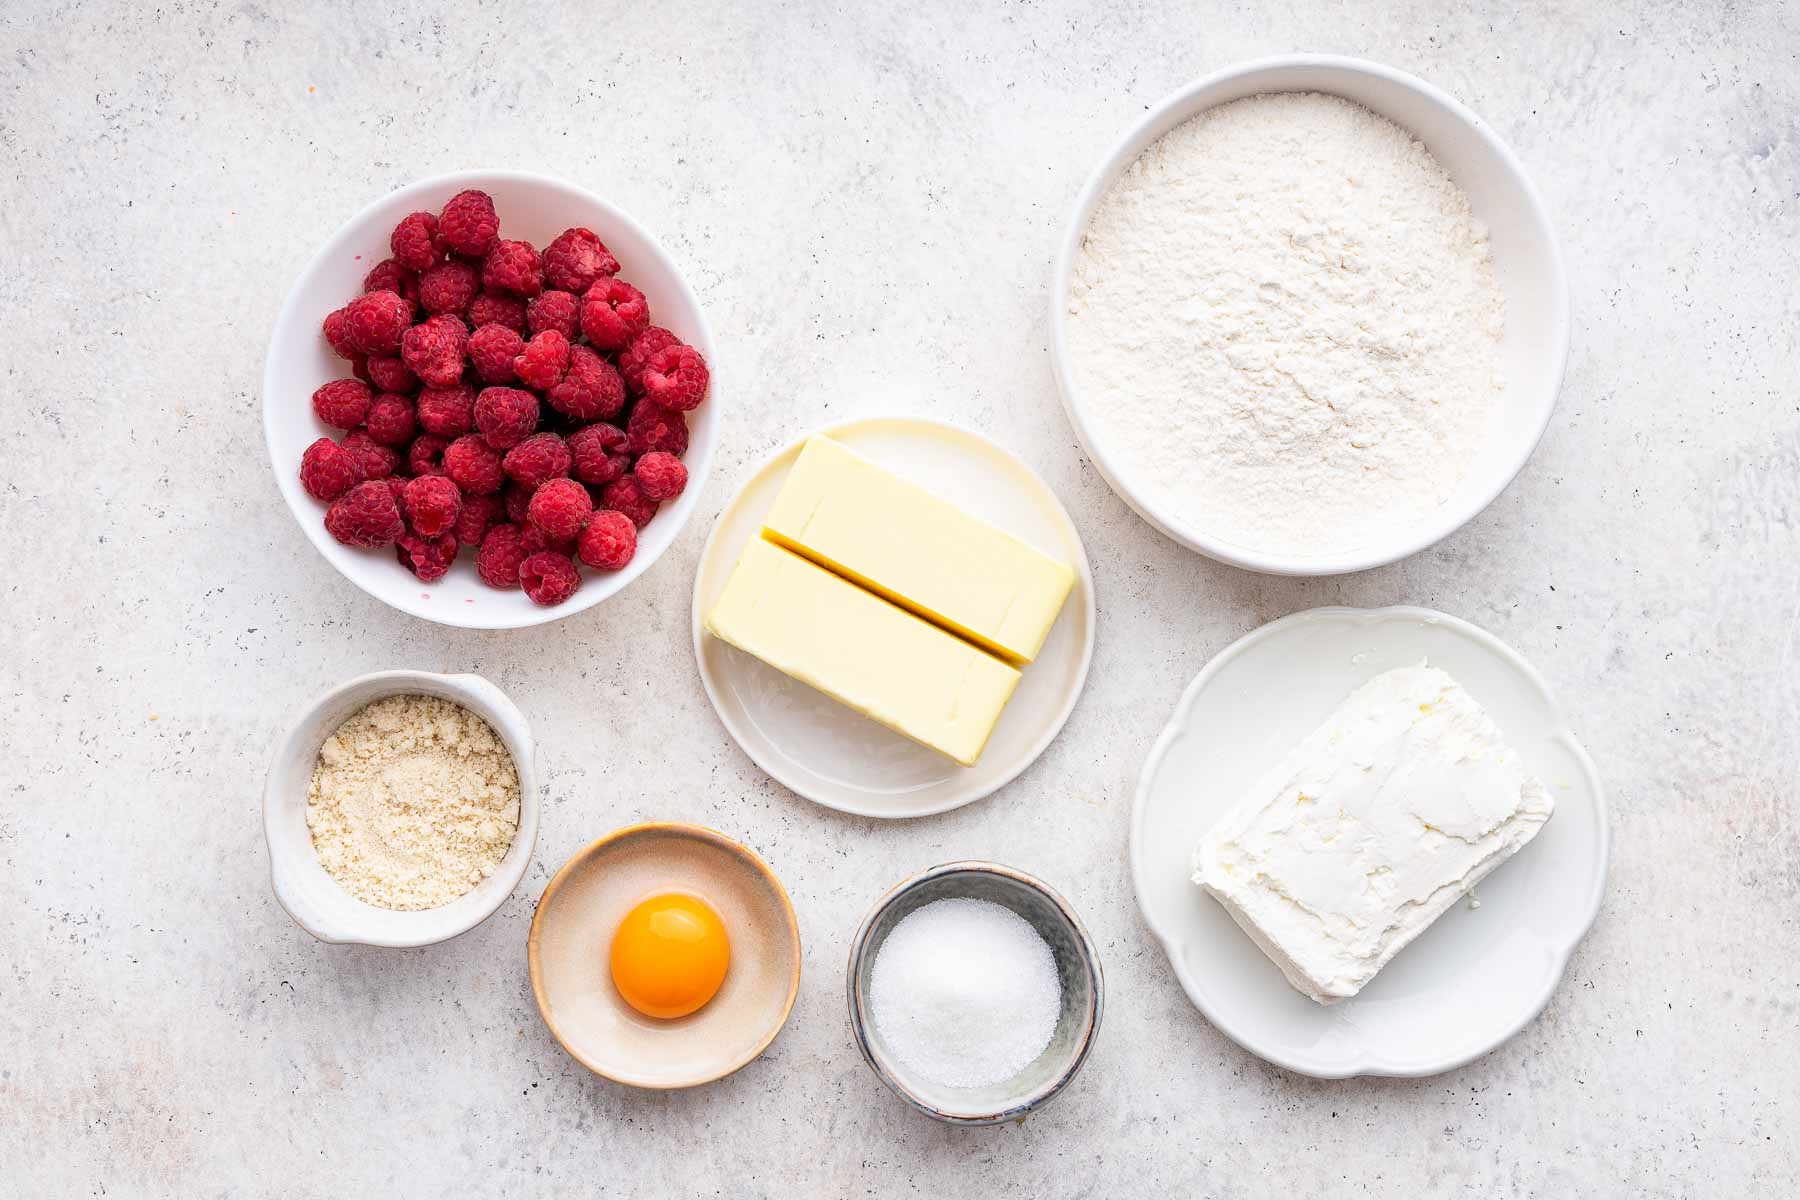 Bowl of raspberries, egg yolk, butter, sugar, and almond flour on grey surface.